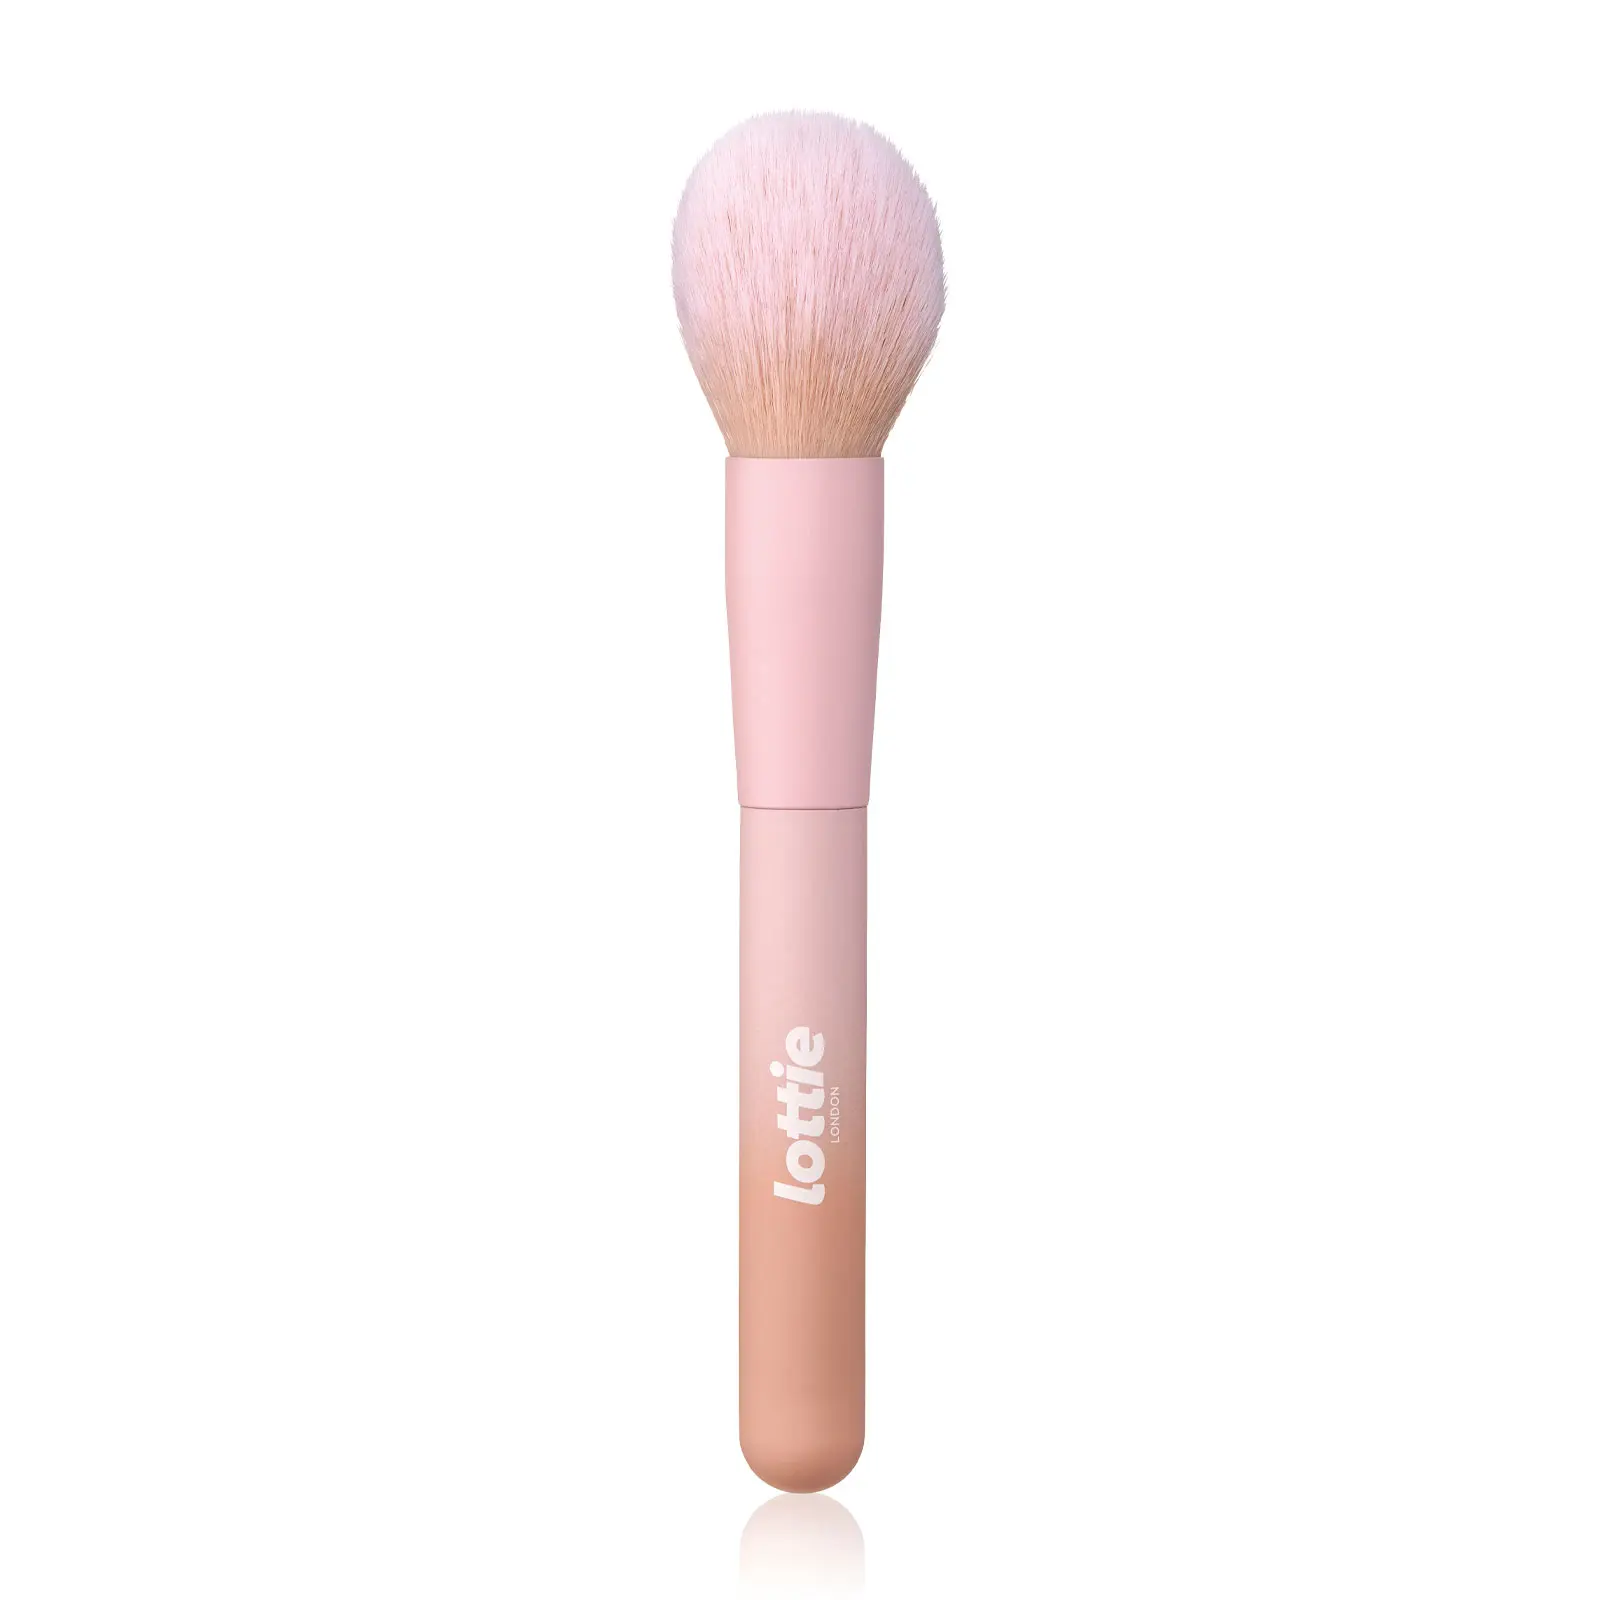 Lottie London Tapered Bronzer Brush Discounts and Cashback